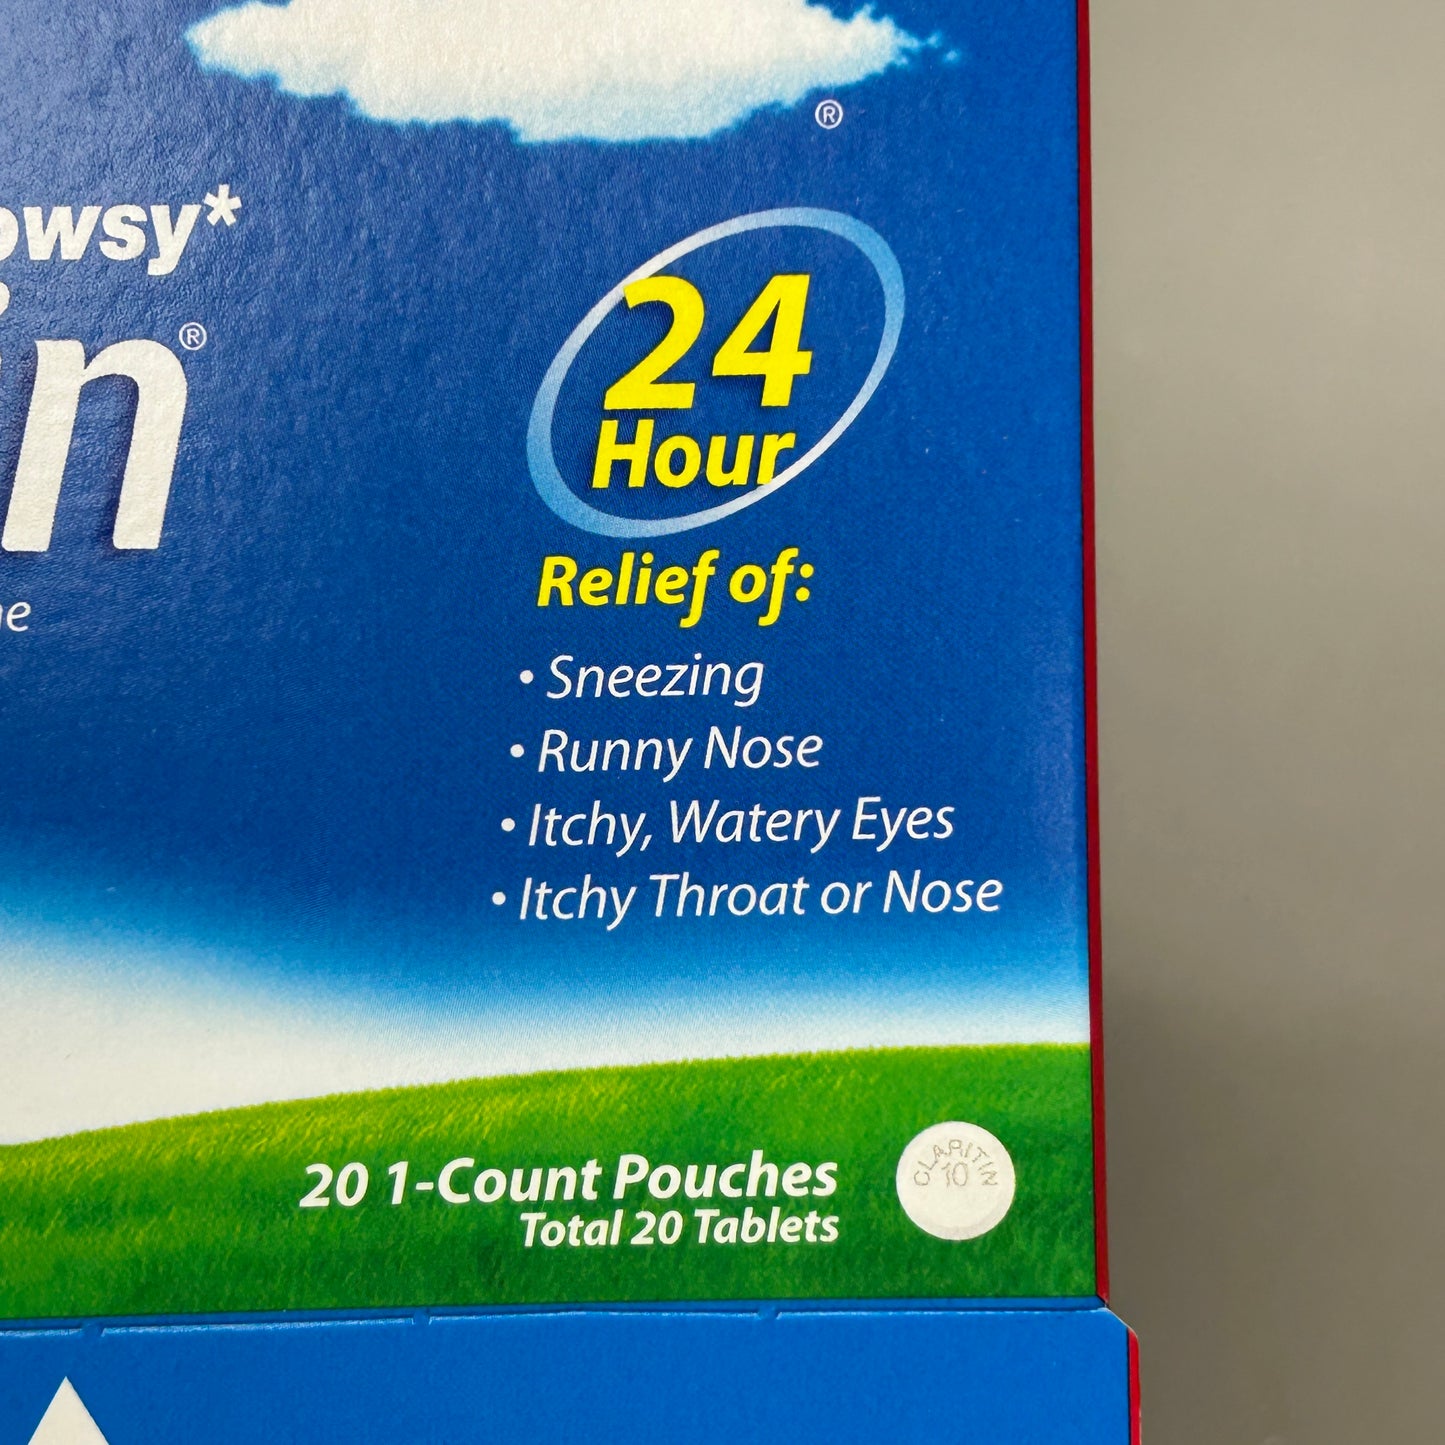 CLARITIN Non-Drowsy Loratadine Tablets 24 Hour Indoor & Outdoor Allergies Exp 07/25 (New)